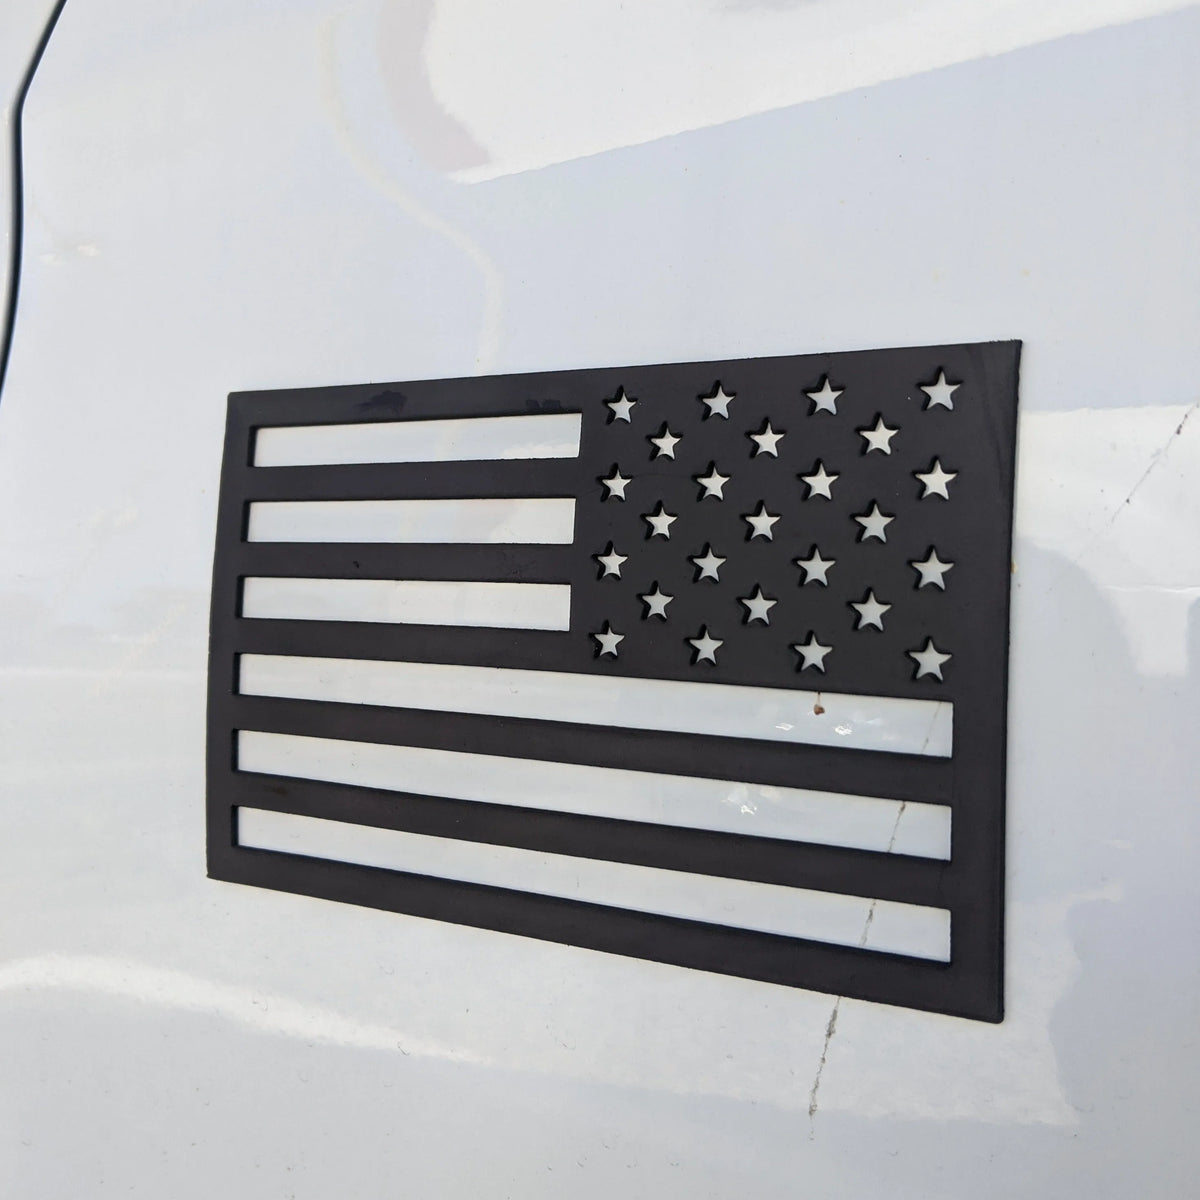 CUT OUT CAR/TRUCK AMERICAN FLAG REVERSED MAGNET - THICK, QUALITY STOCK -1/16" x 3.75"x6"